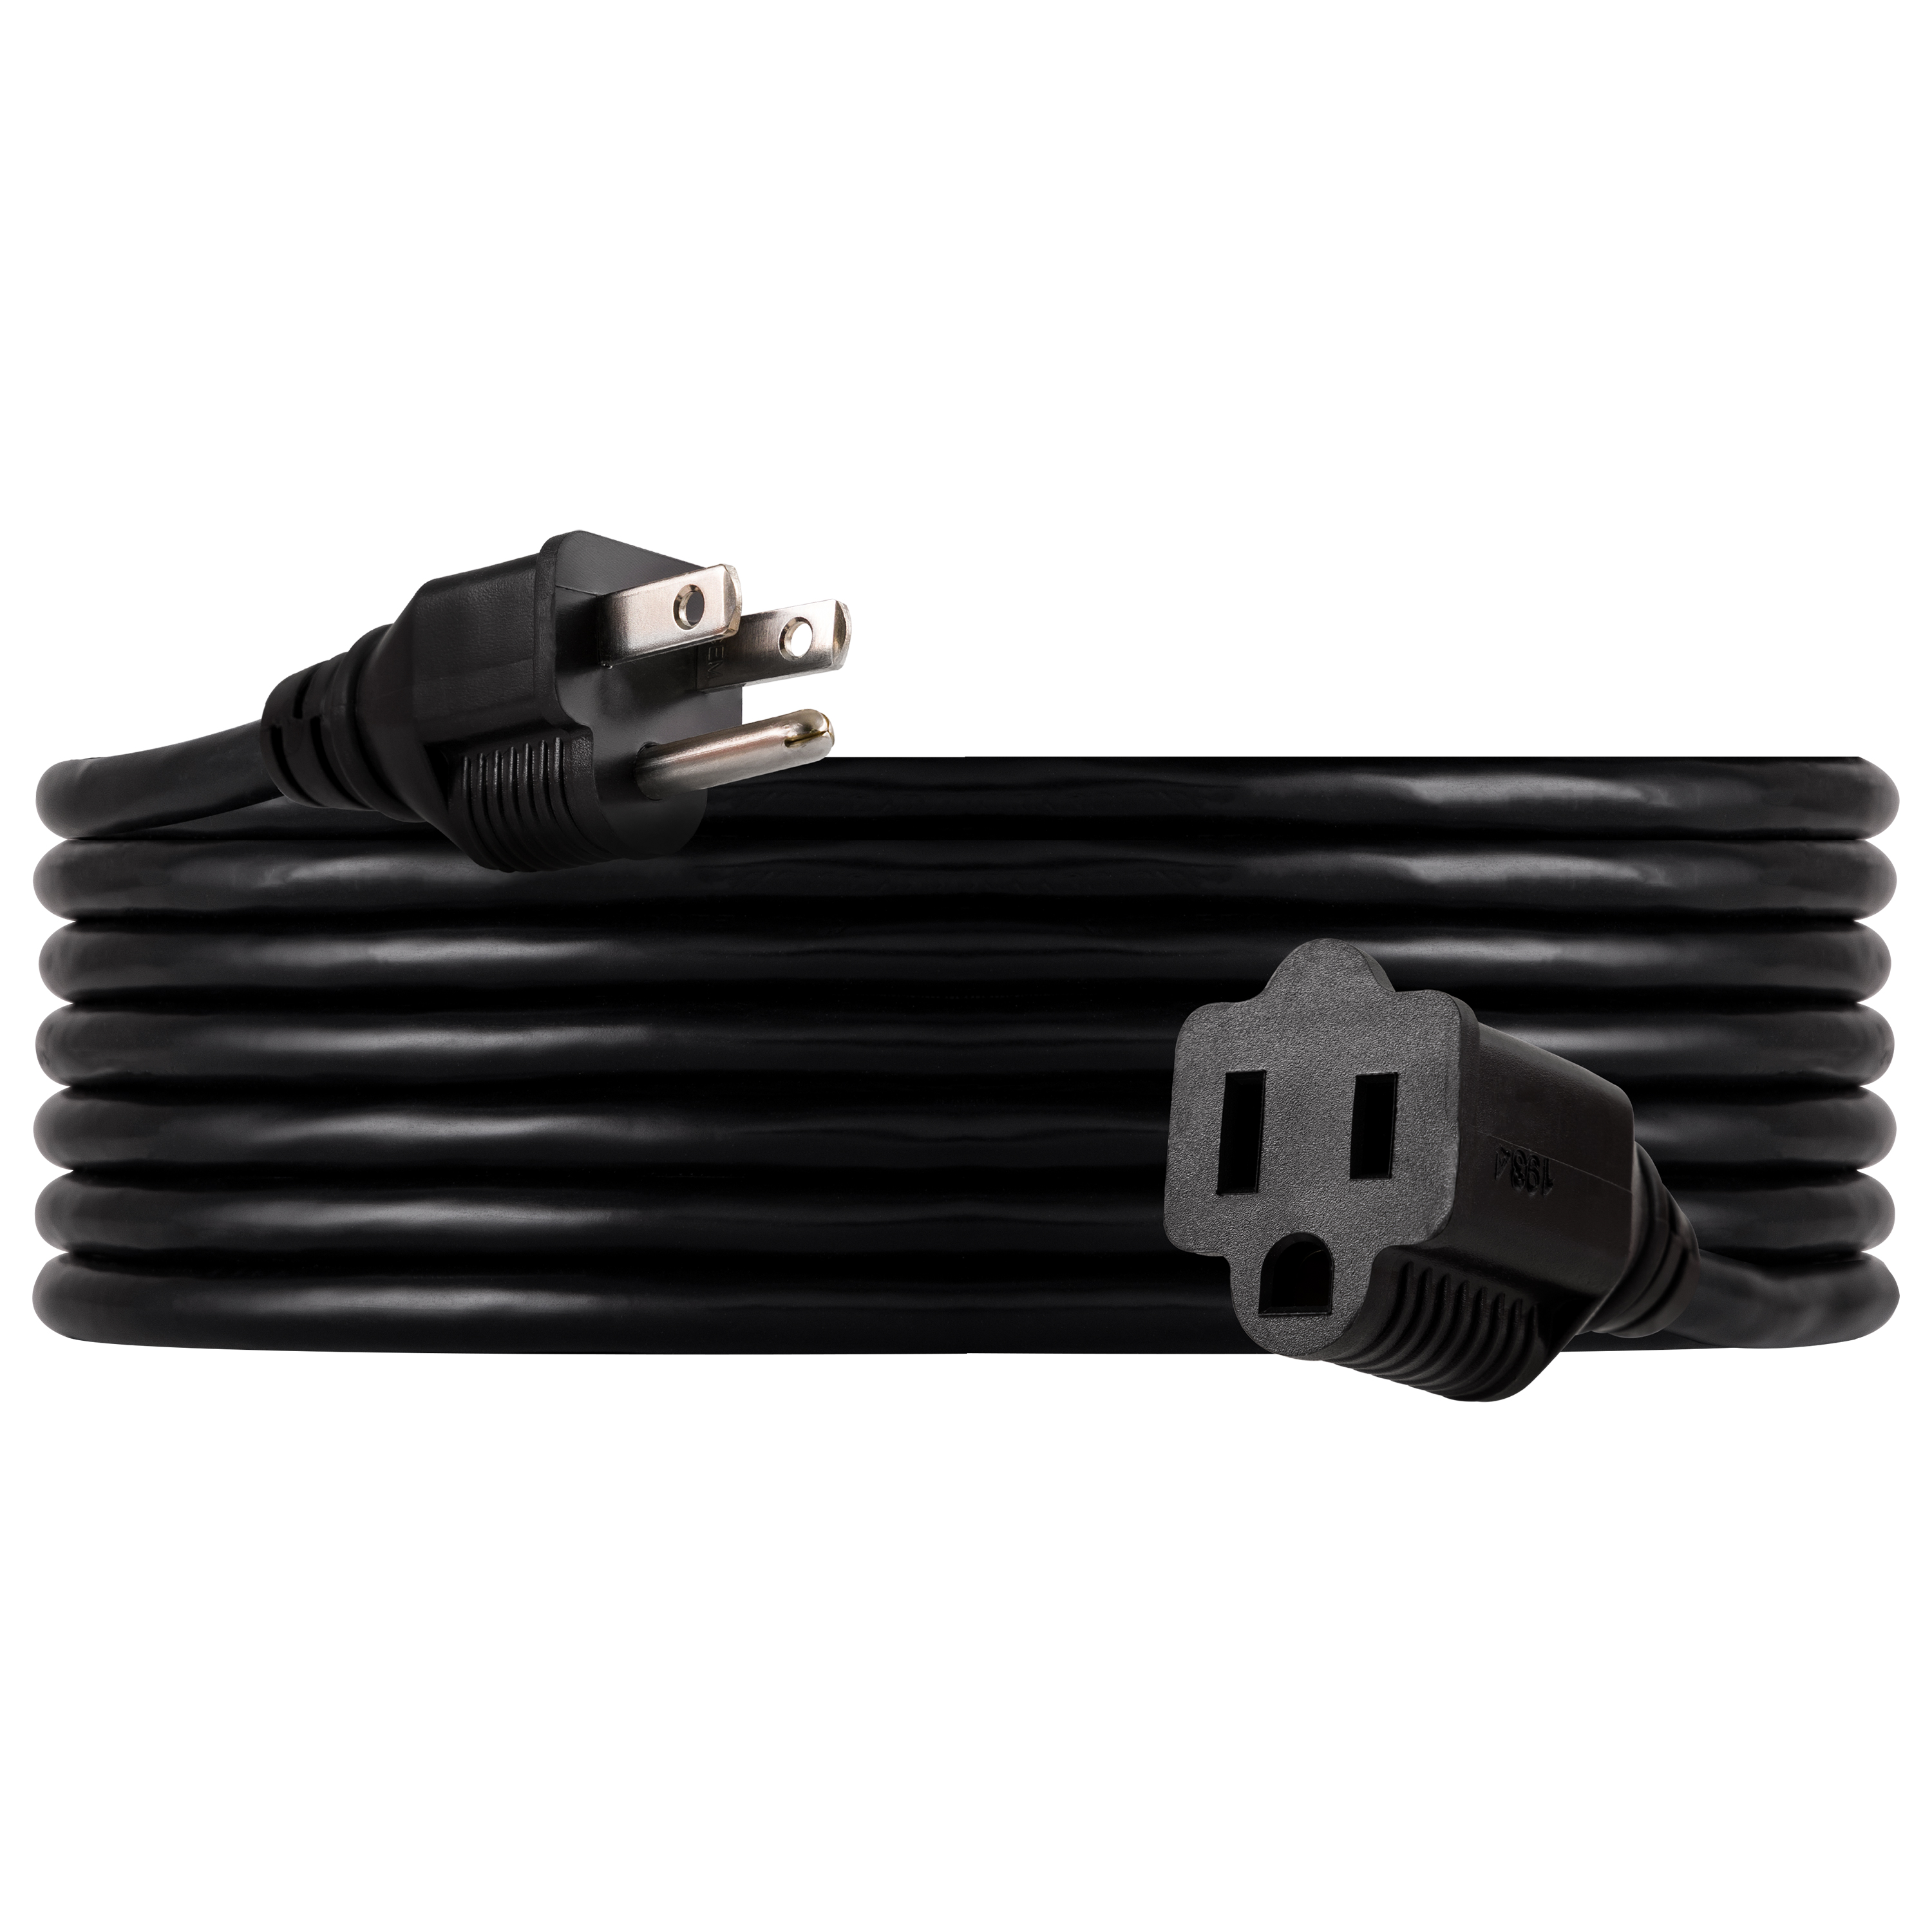 GE 15 ft Outdoor Extension Cord, 1 Outlet, Black, 36824 - image 1 of 7